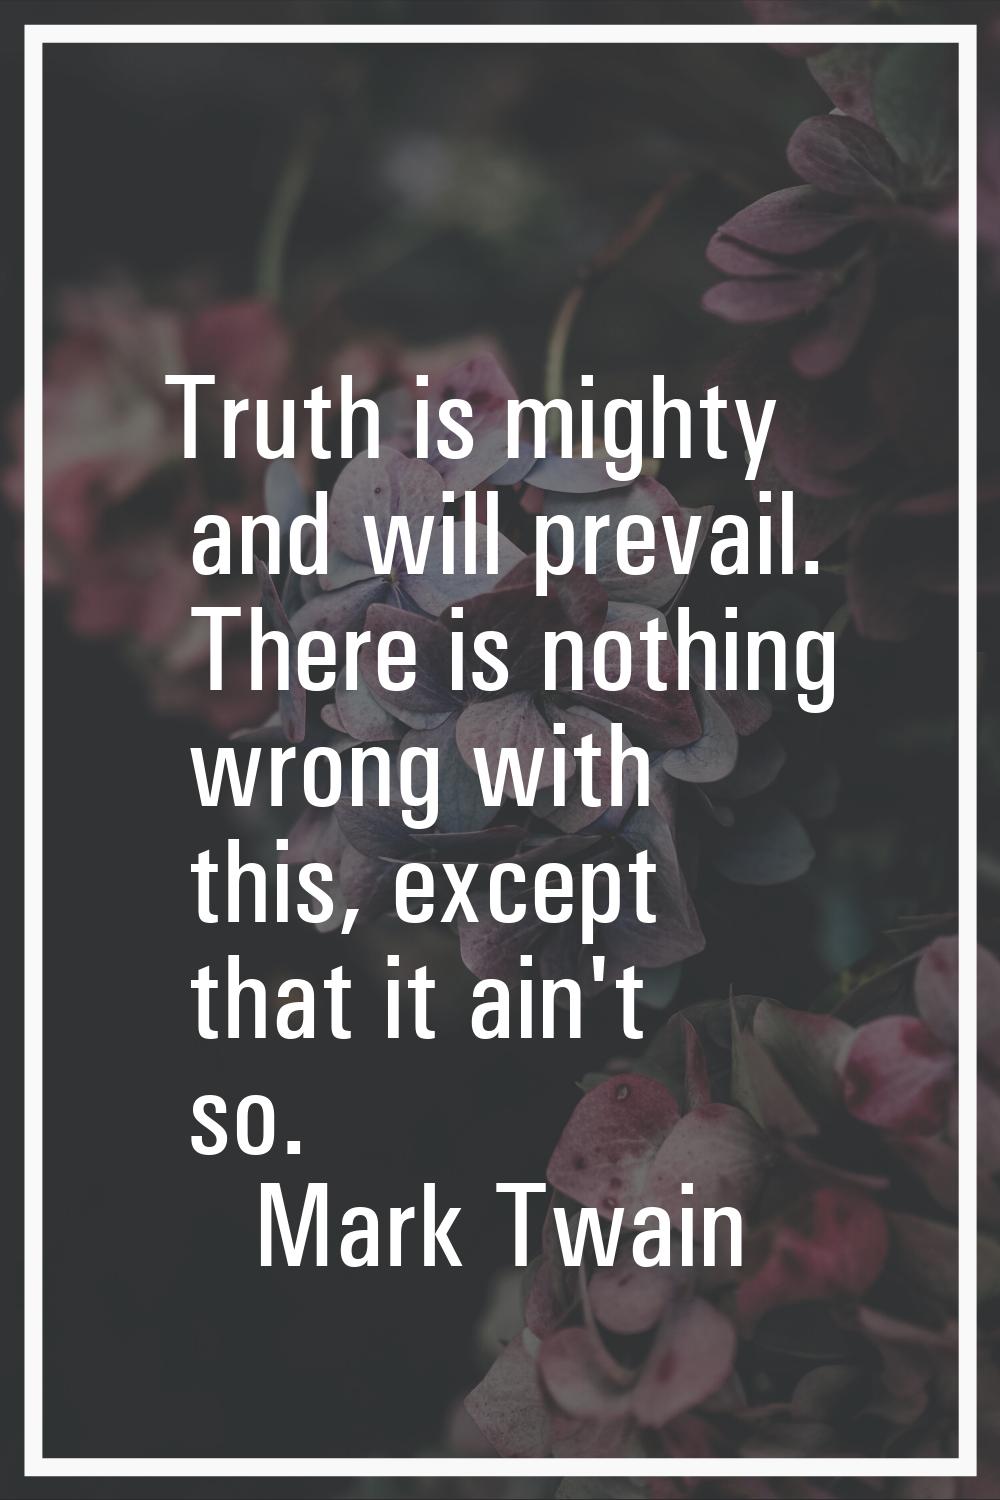 Truth is mighty and will prevail. There is nothing wrong with this, except that it ain't so.